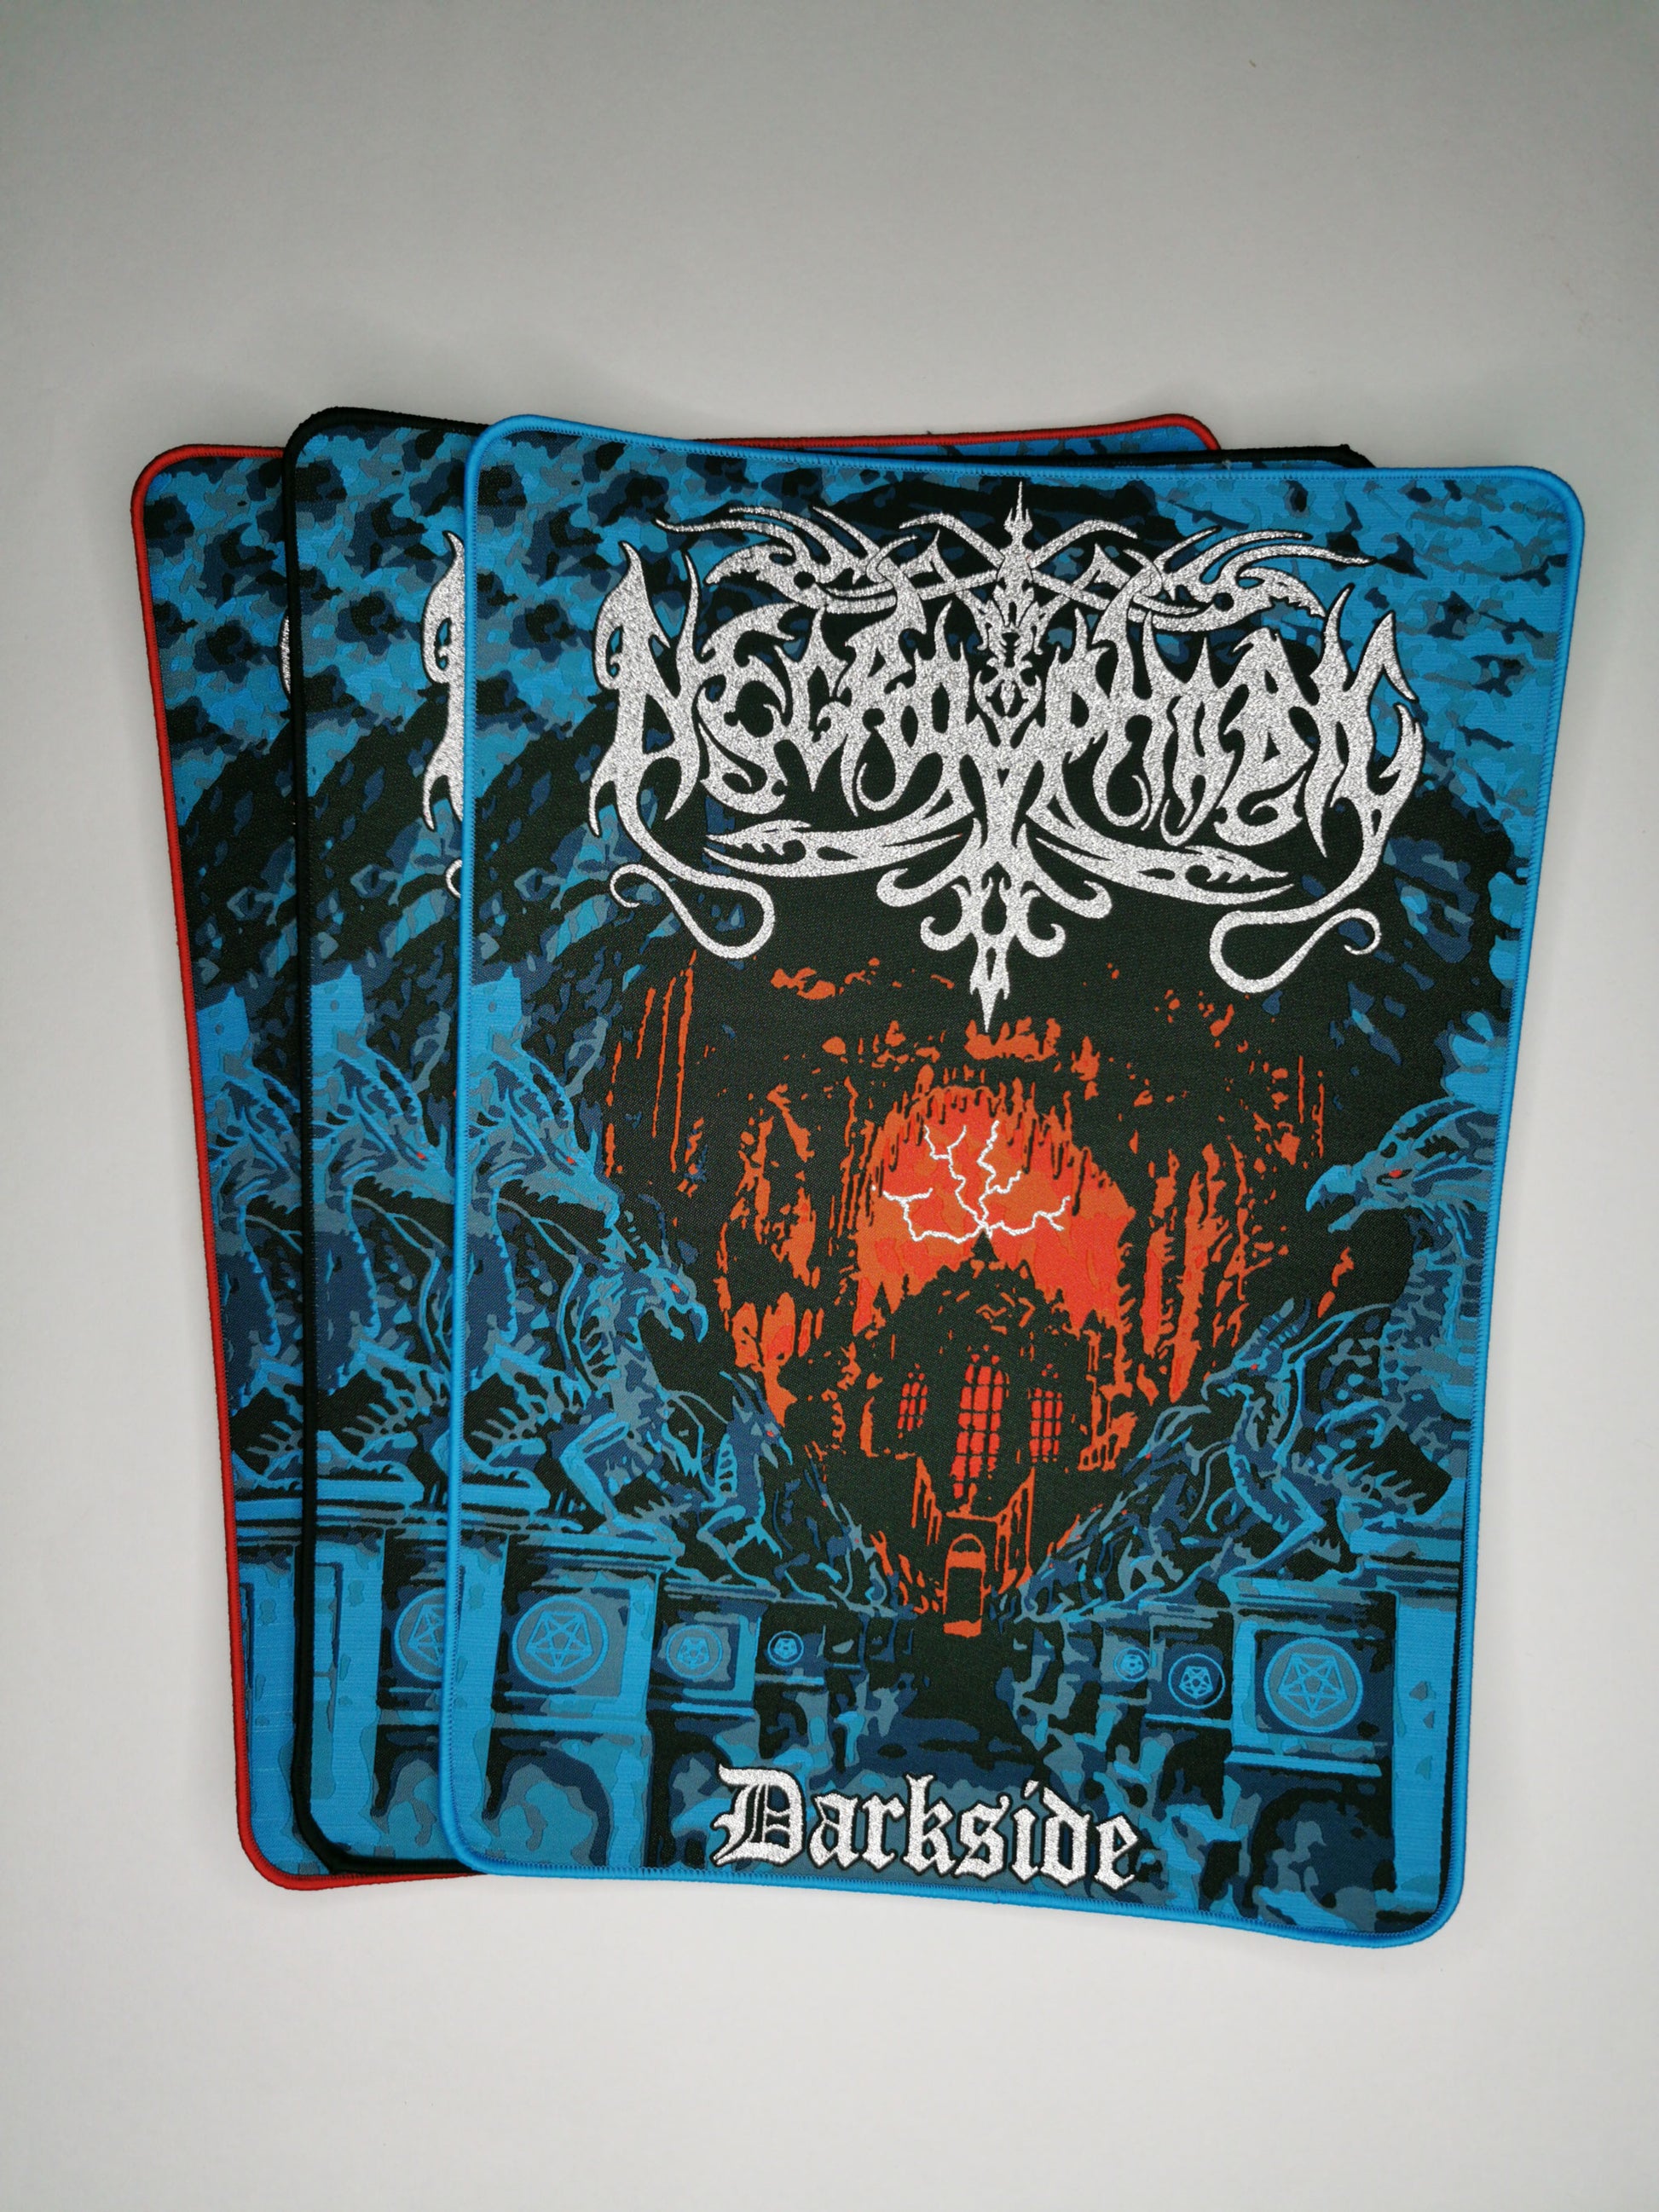 TDP Necrophobic Darkside Woven Backpatches